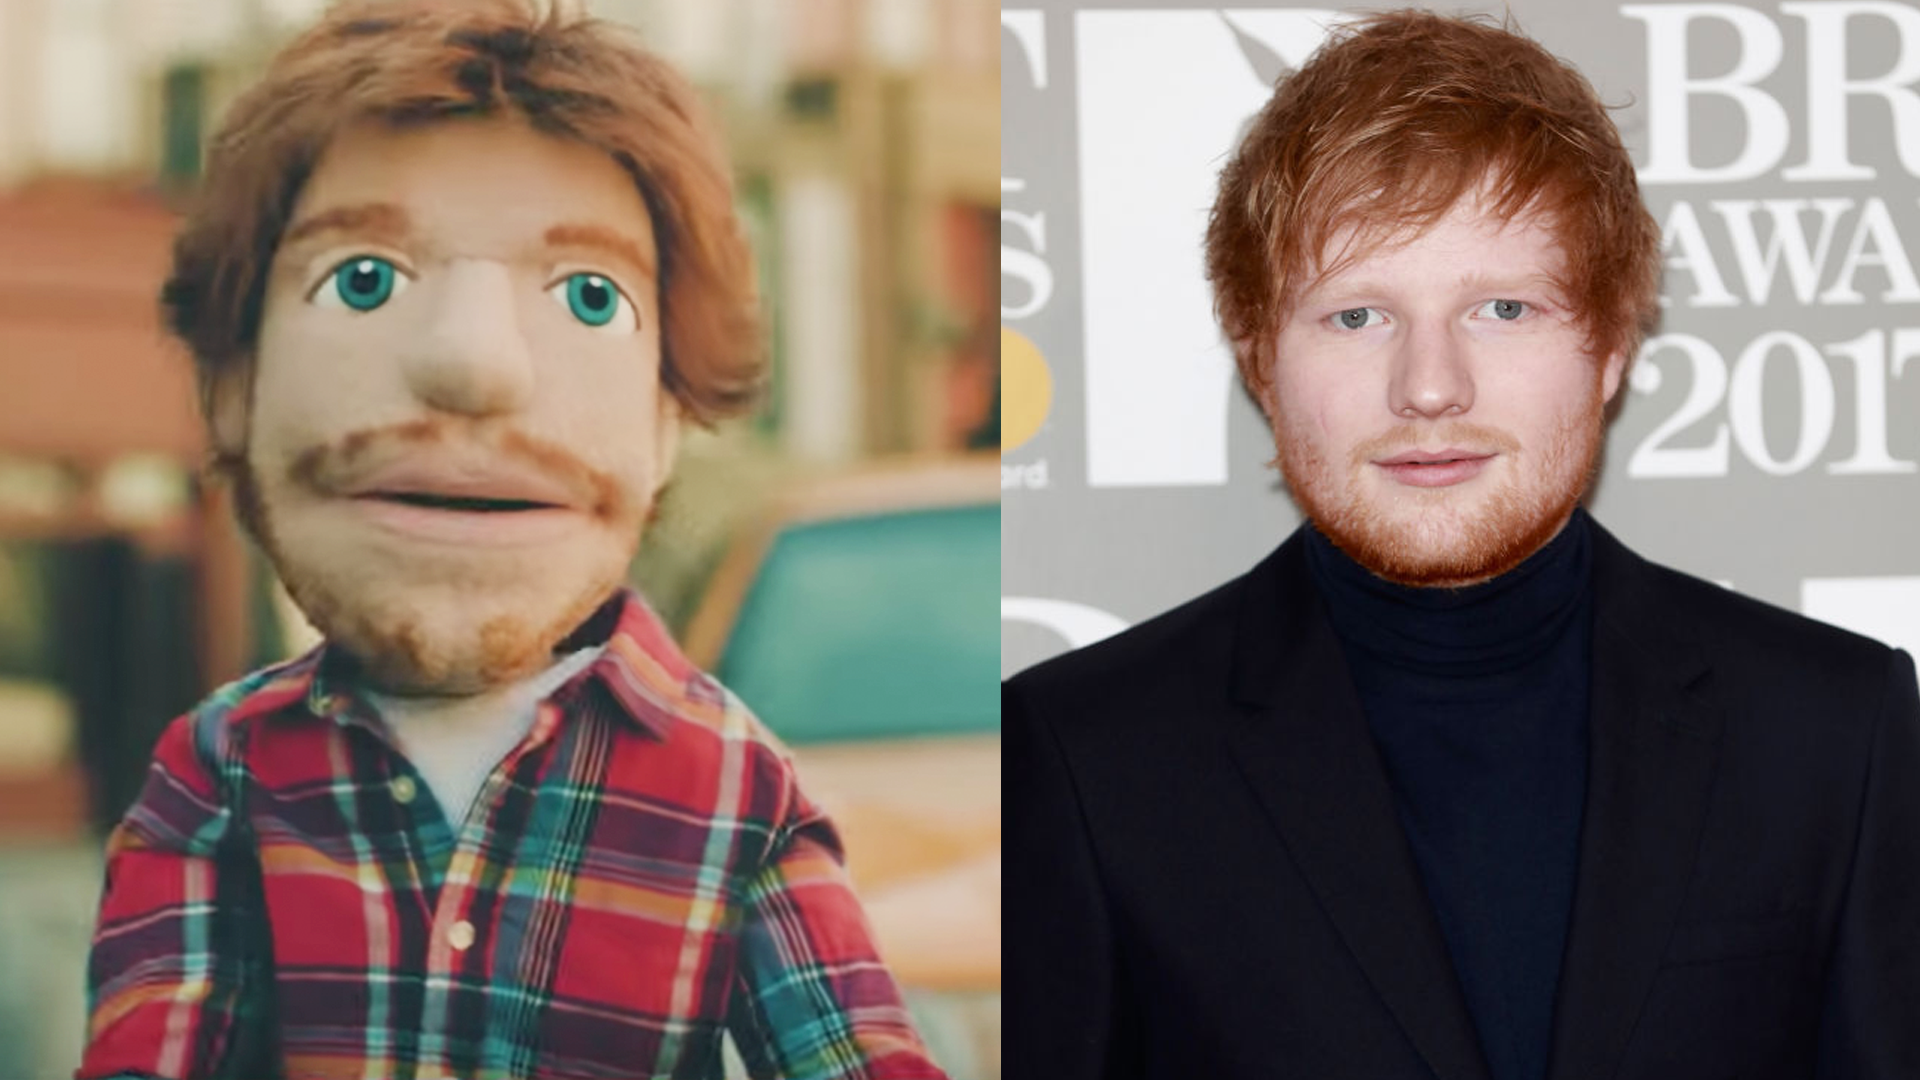 The puppet version of Ed Sheeran is a very generous replica of real life Ed ...